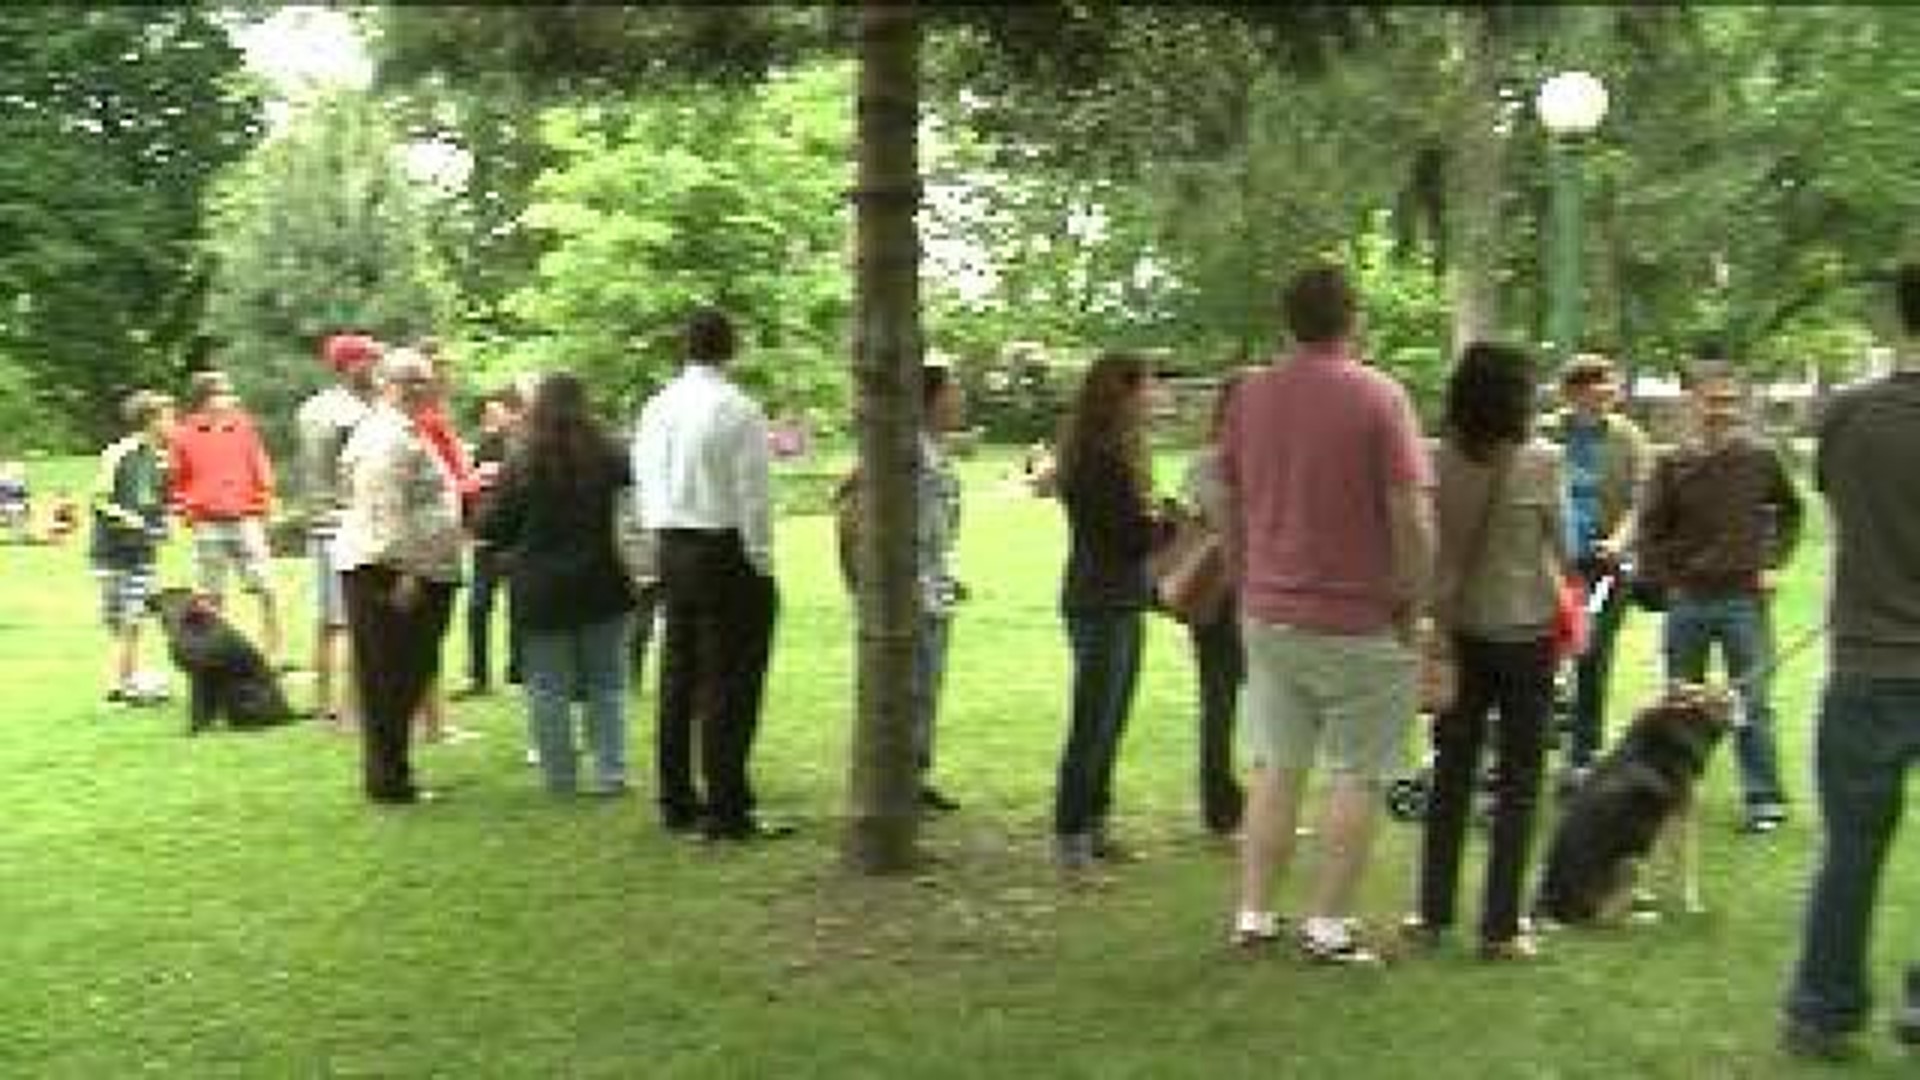 In Lewisburg, A Picnic To Raise Awareness